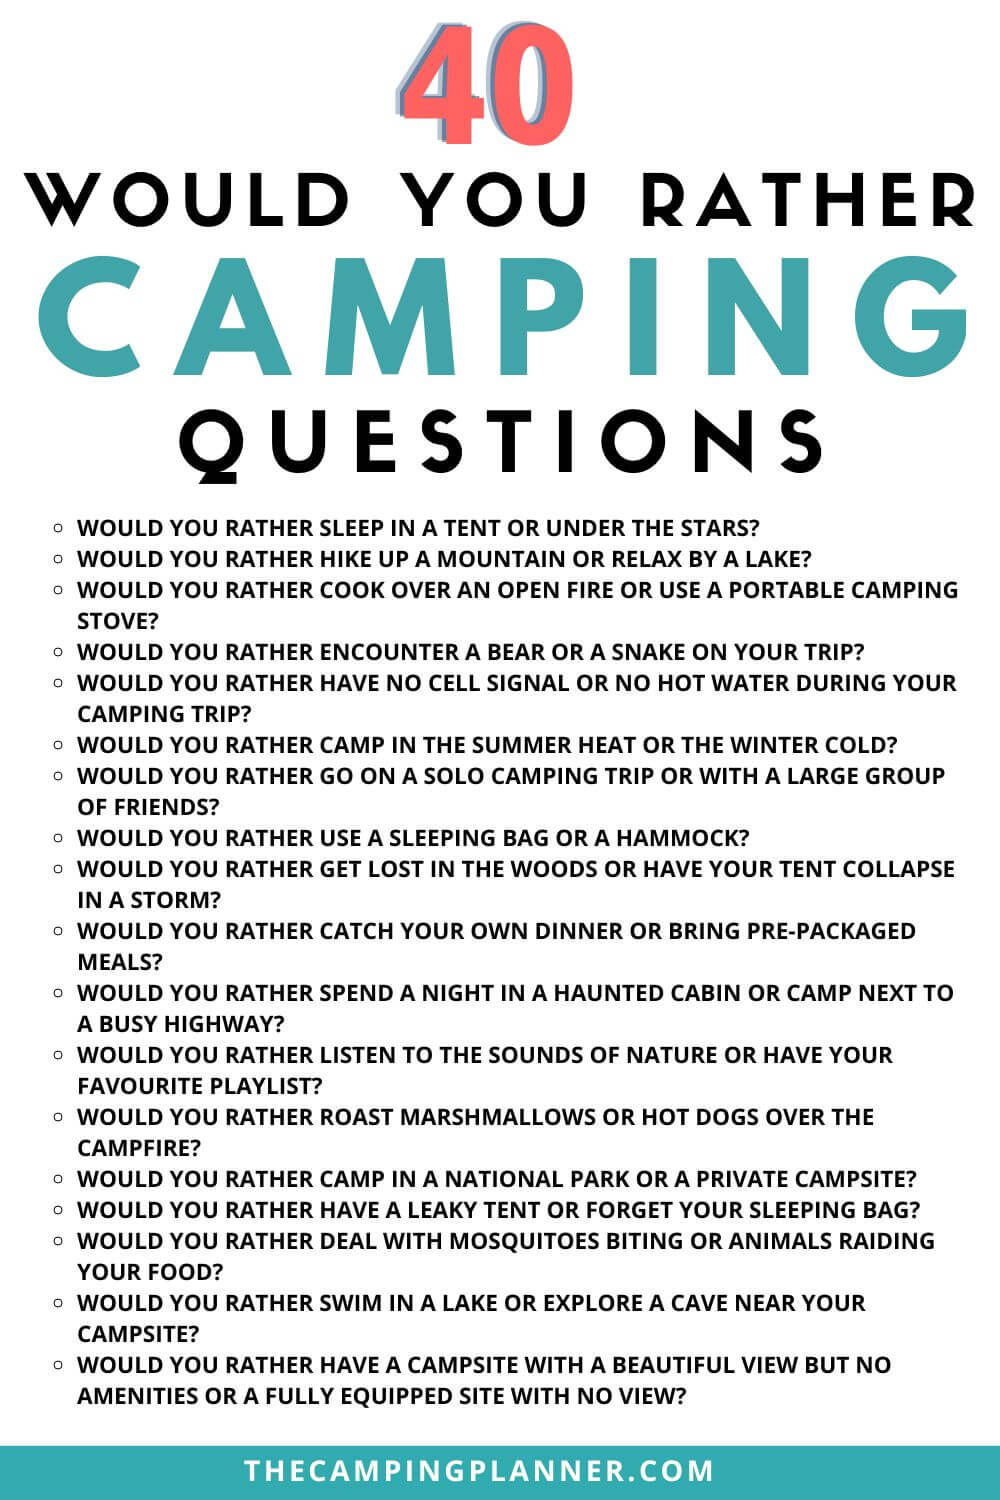 camping would you rather questions for your campfire.